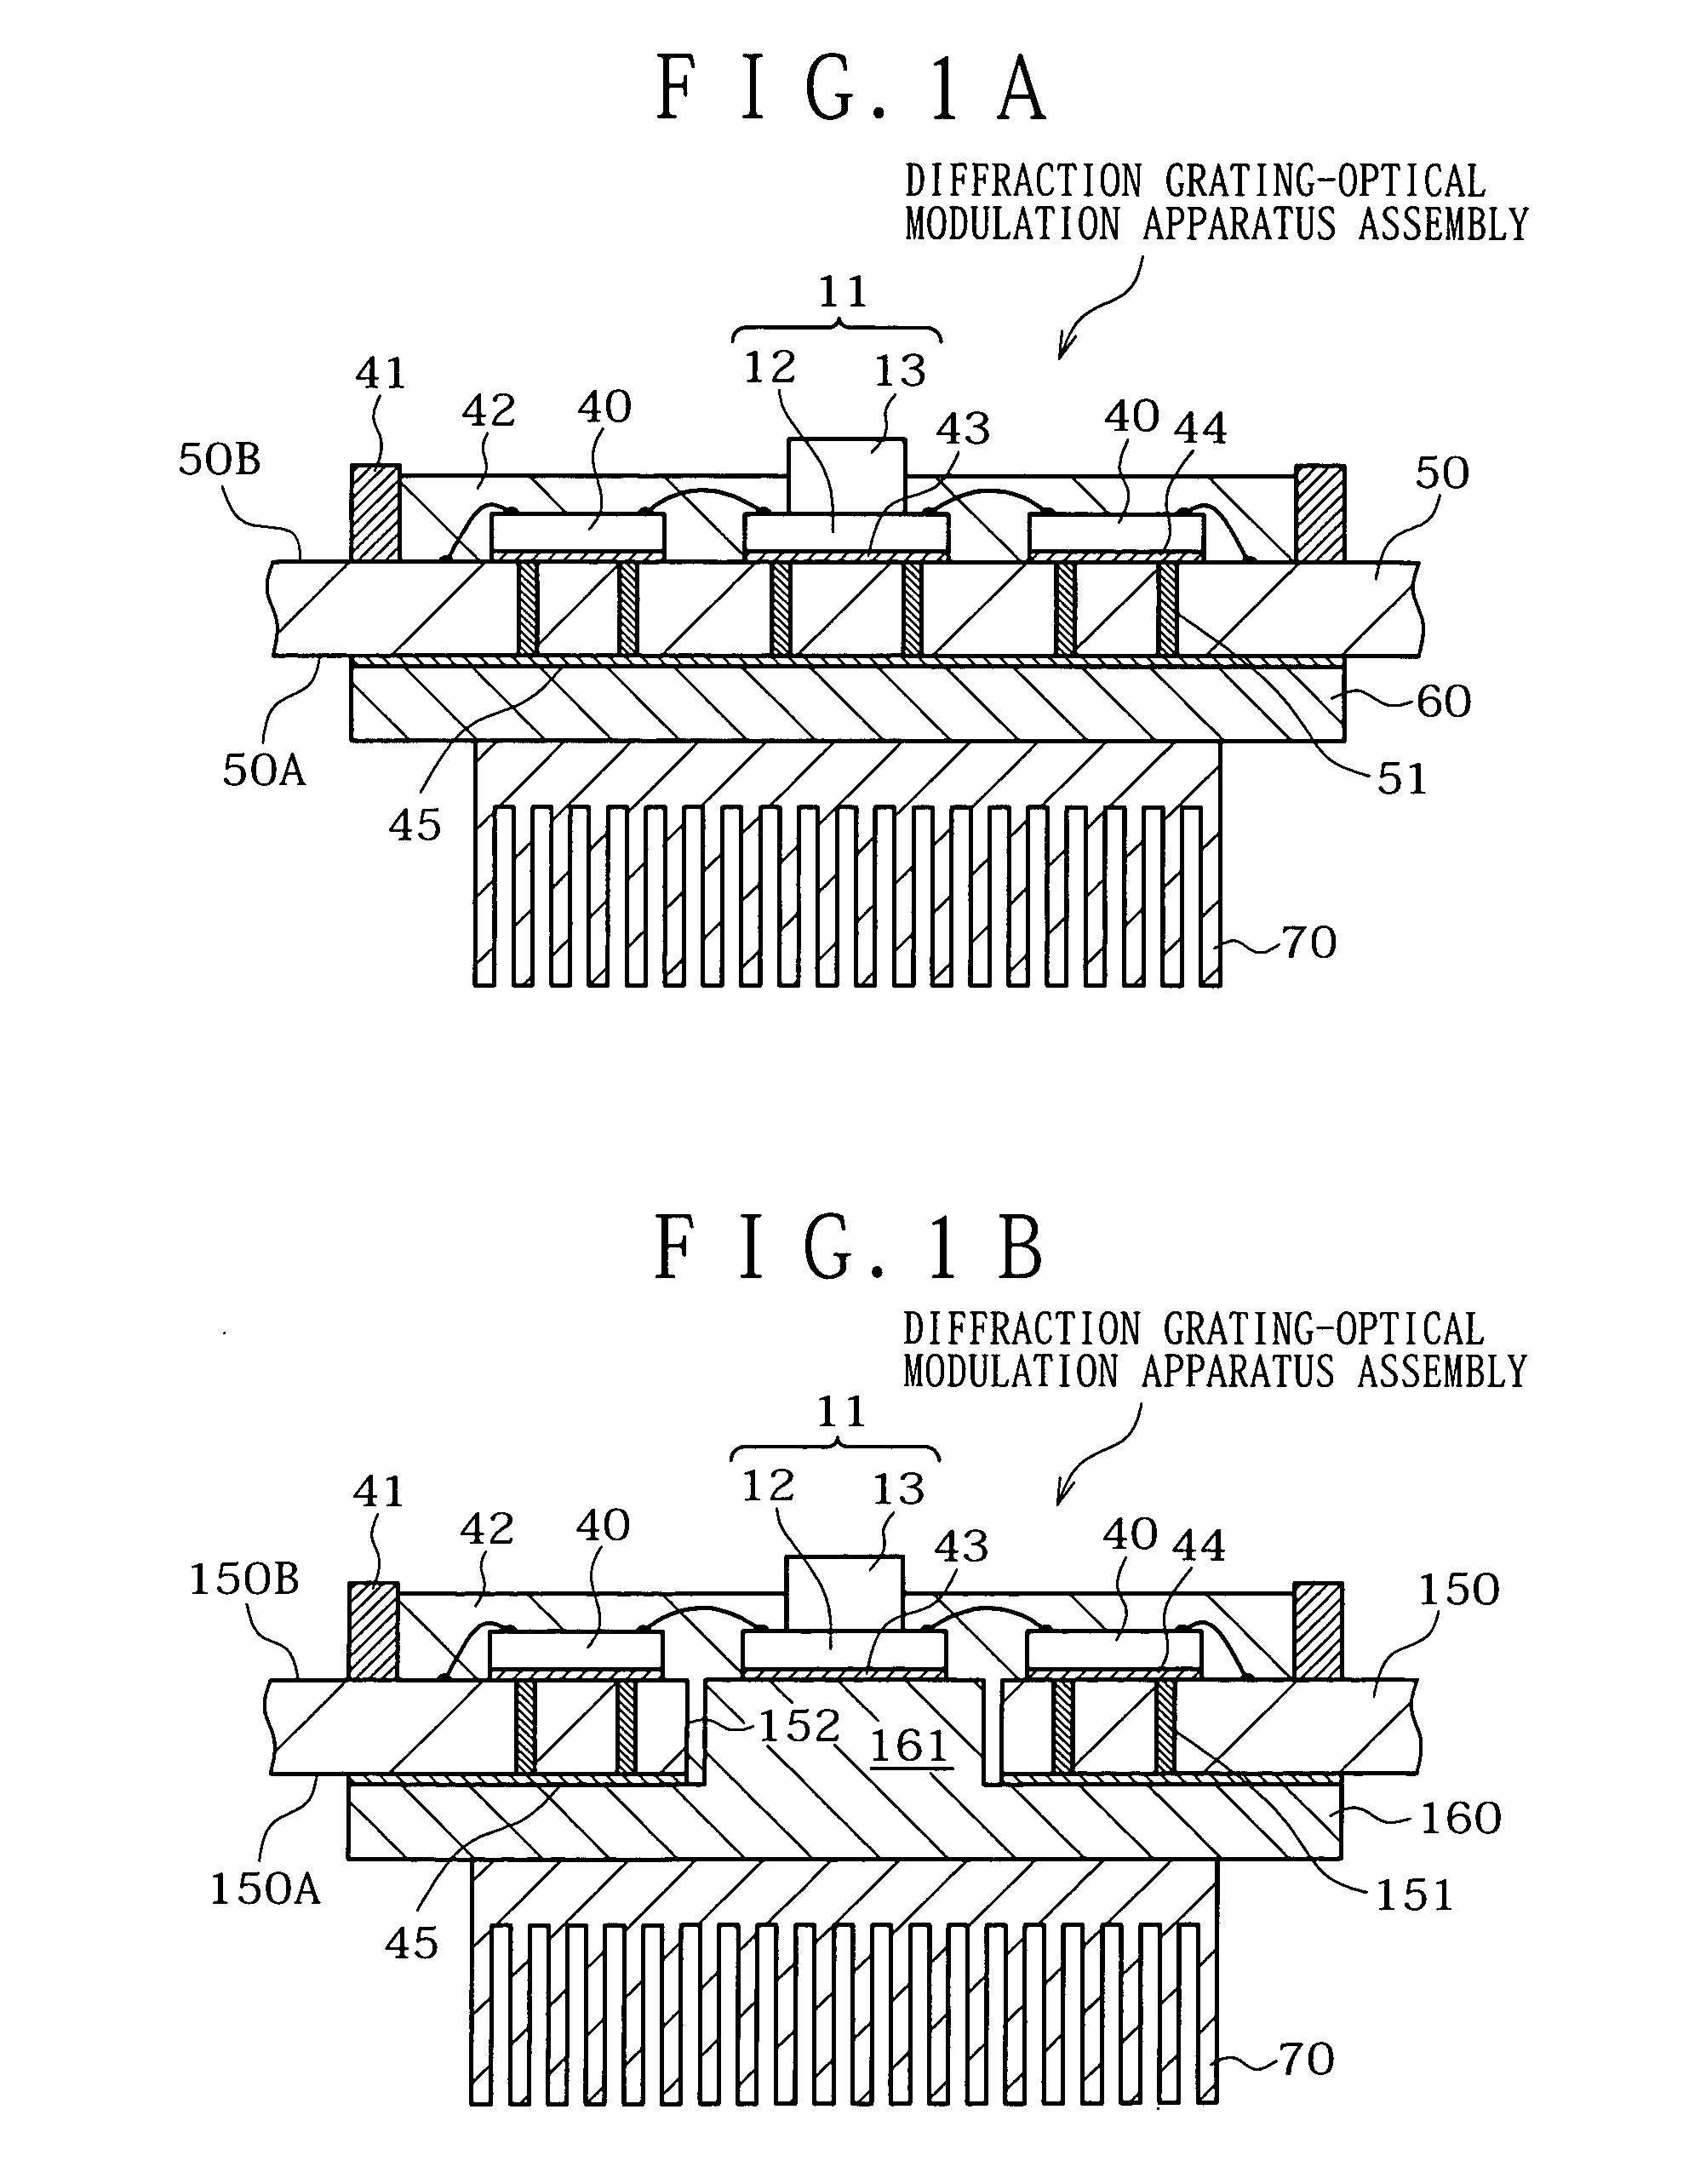 Optical apparatus and image production apparatus